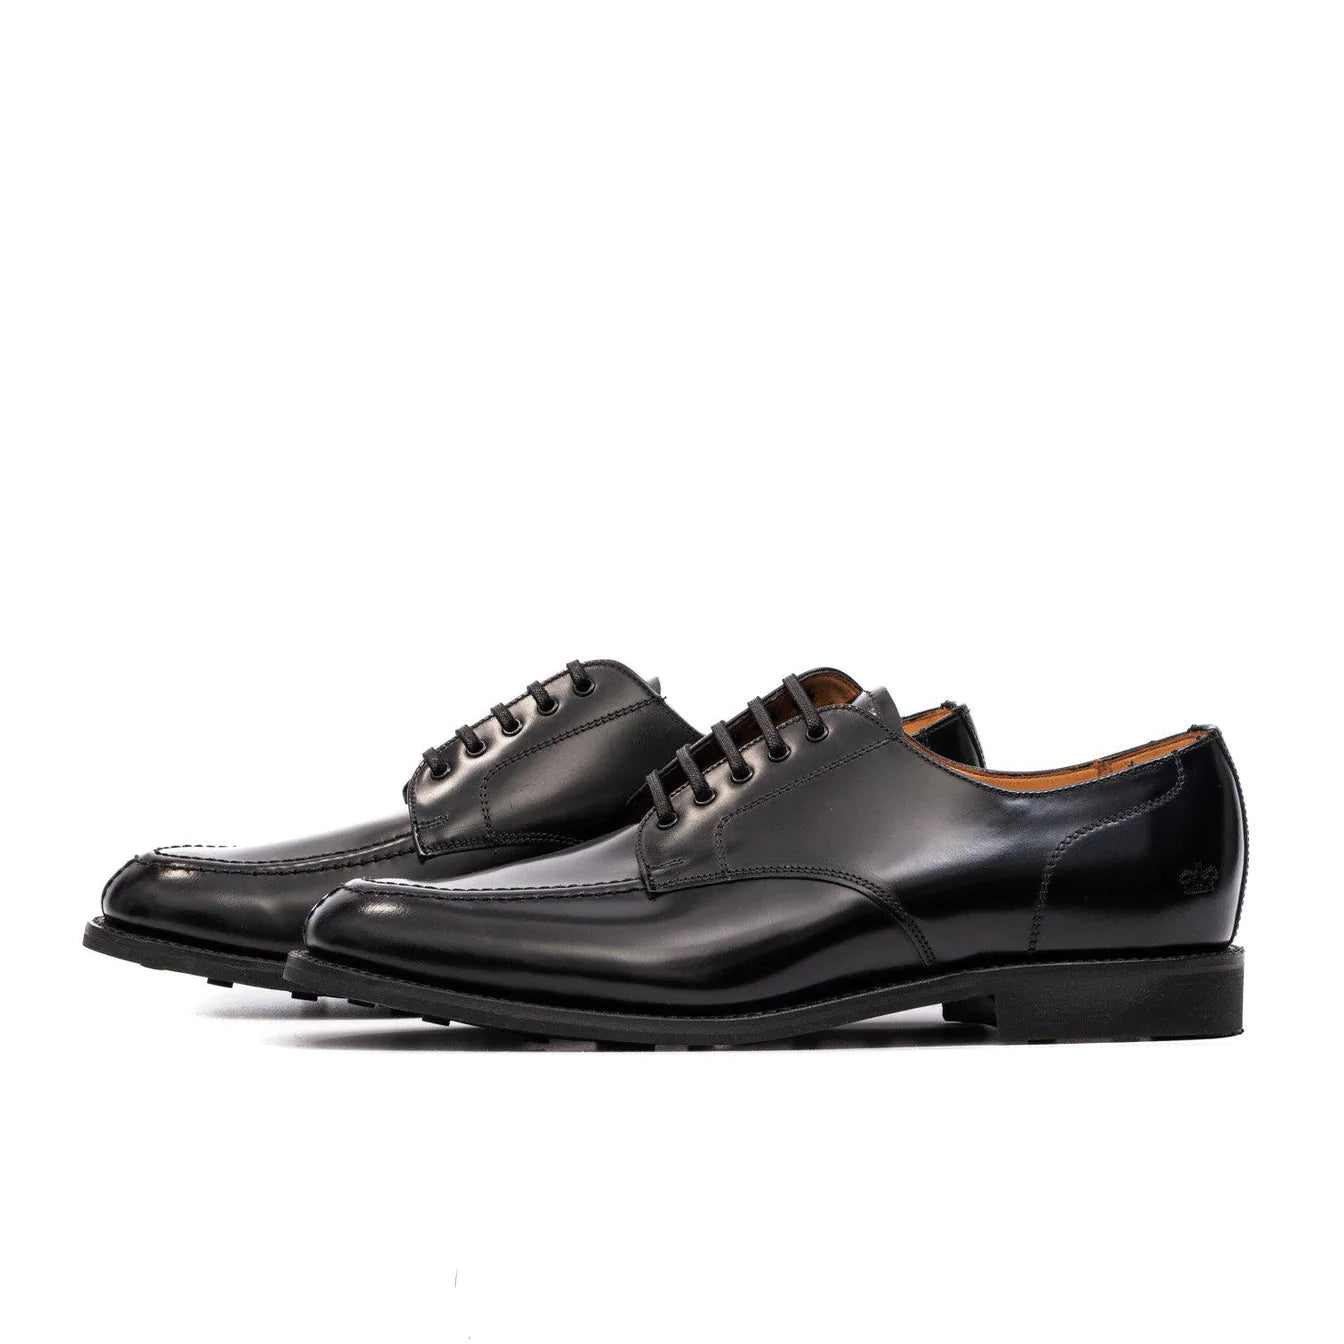 1130B Military Derby Shoe - Black Leather